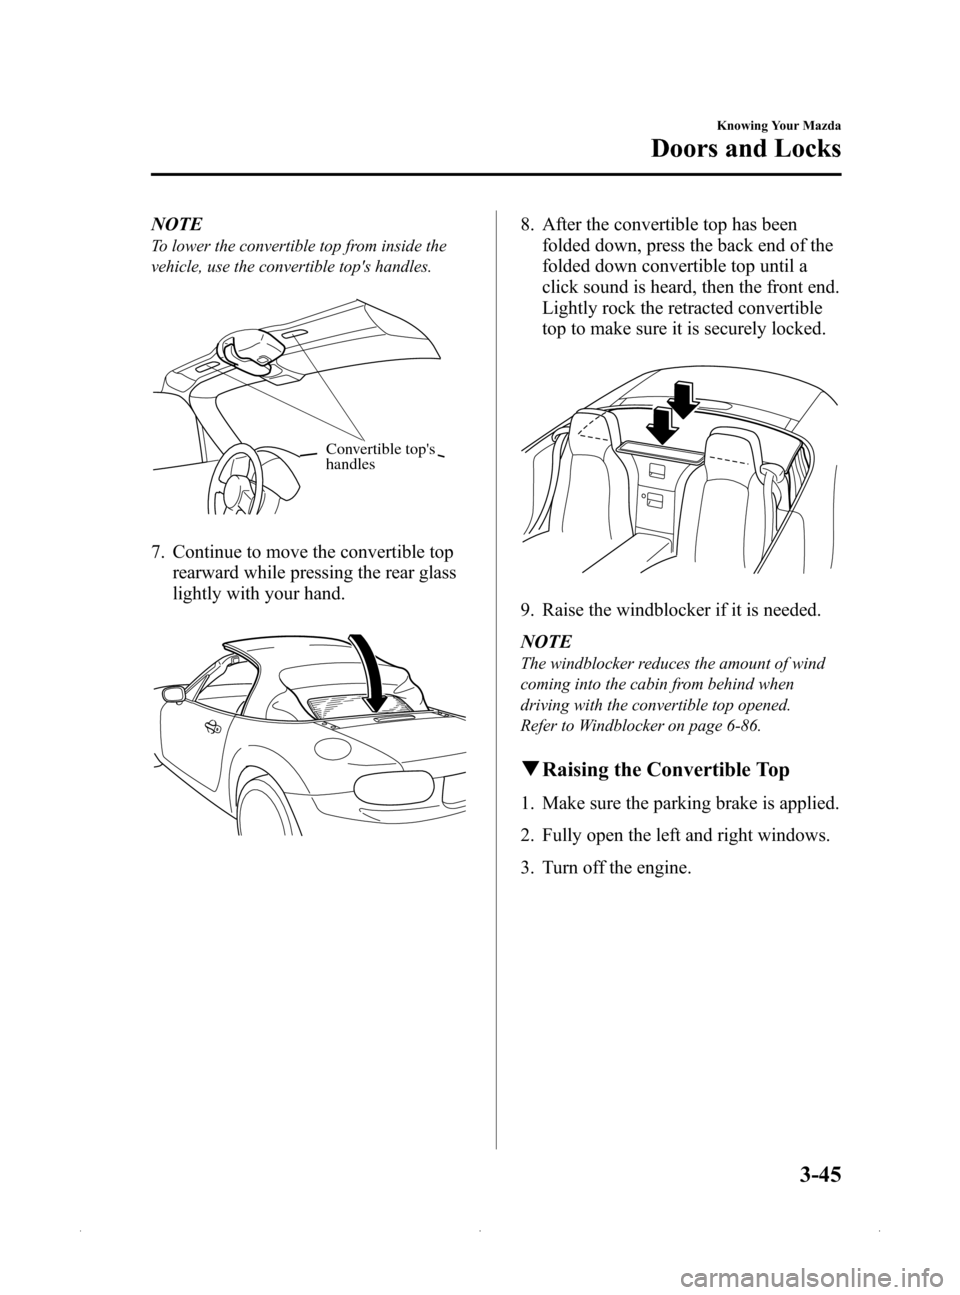 MAZDA MODEL MX-5 PRHT 2015  Owners Manual (in English) Black plate (99,1)
NOTE
To lower the convertible top from inside the
vehicle, use the convertible tops handles.
Convertible tops 
handles
7. Continue to move the convertible top
rearward while press